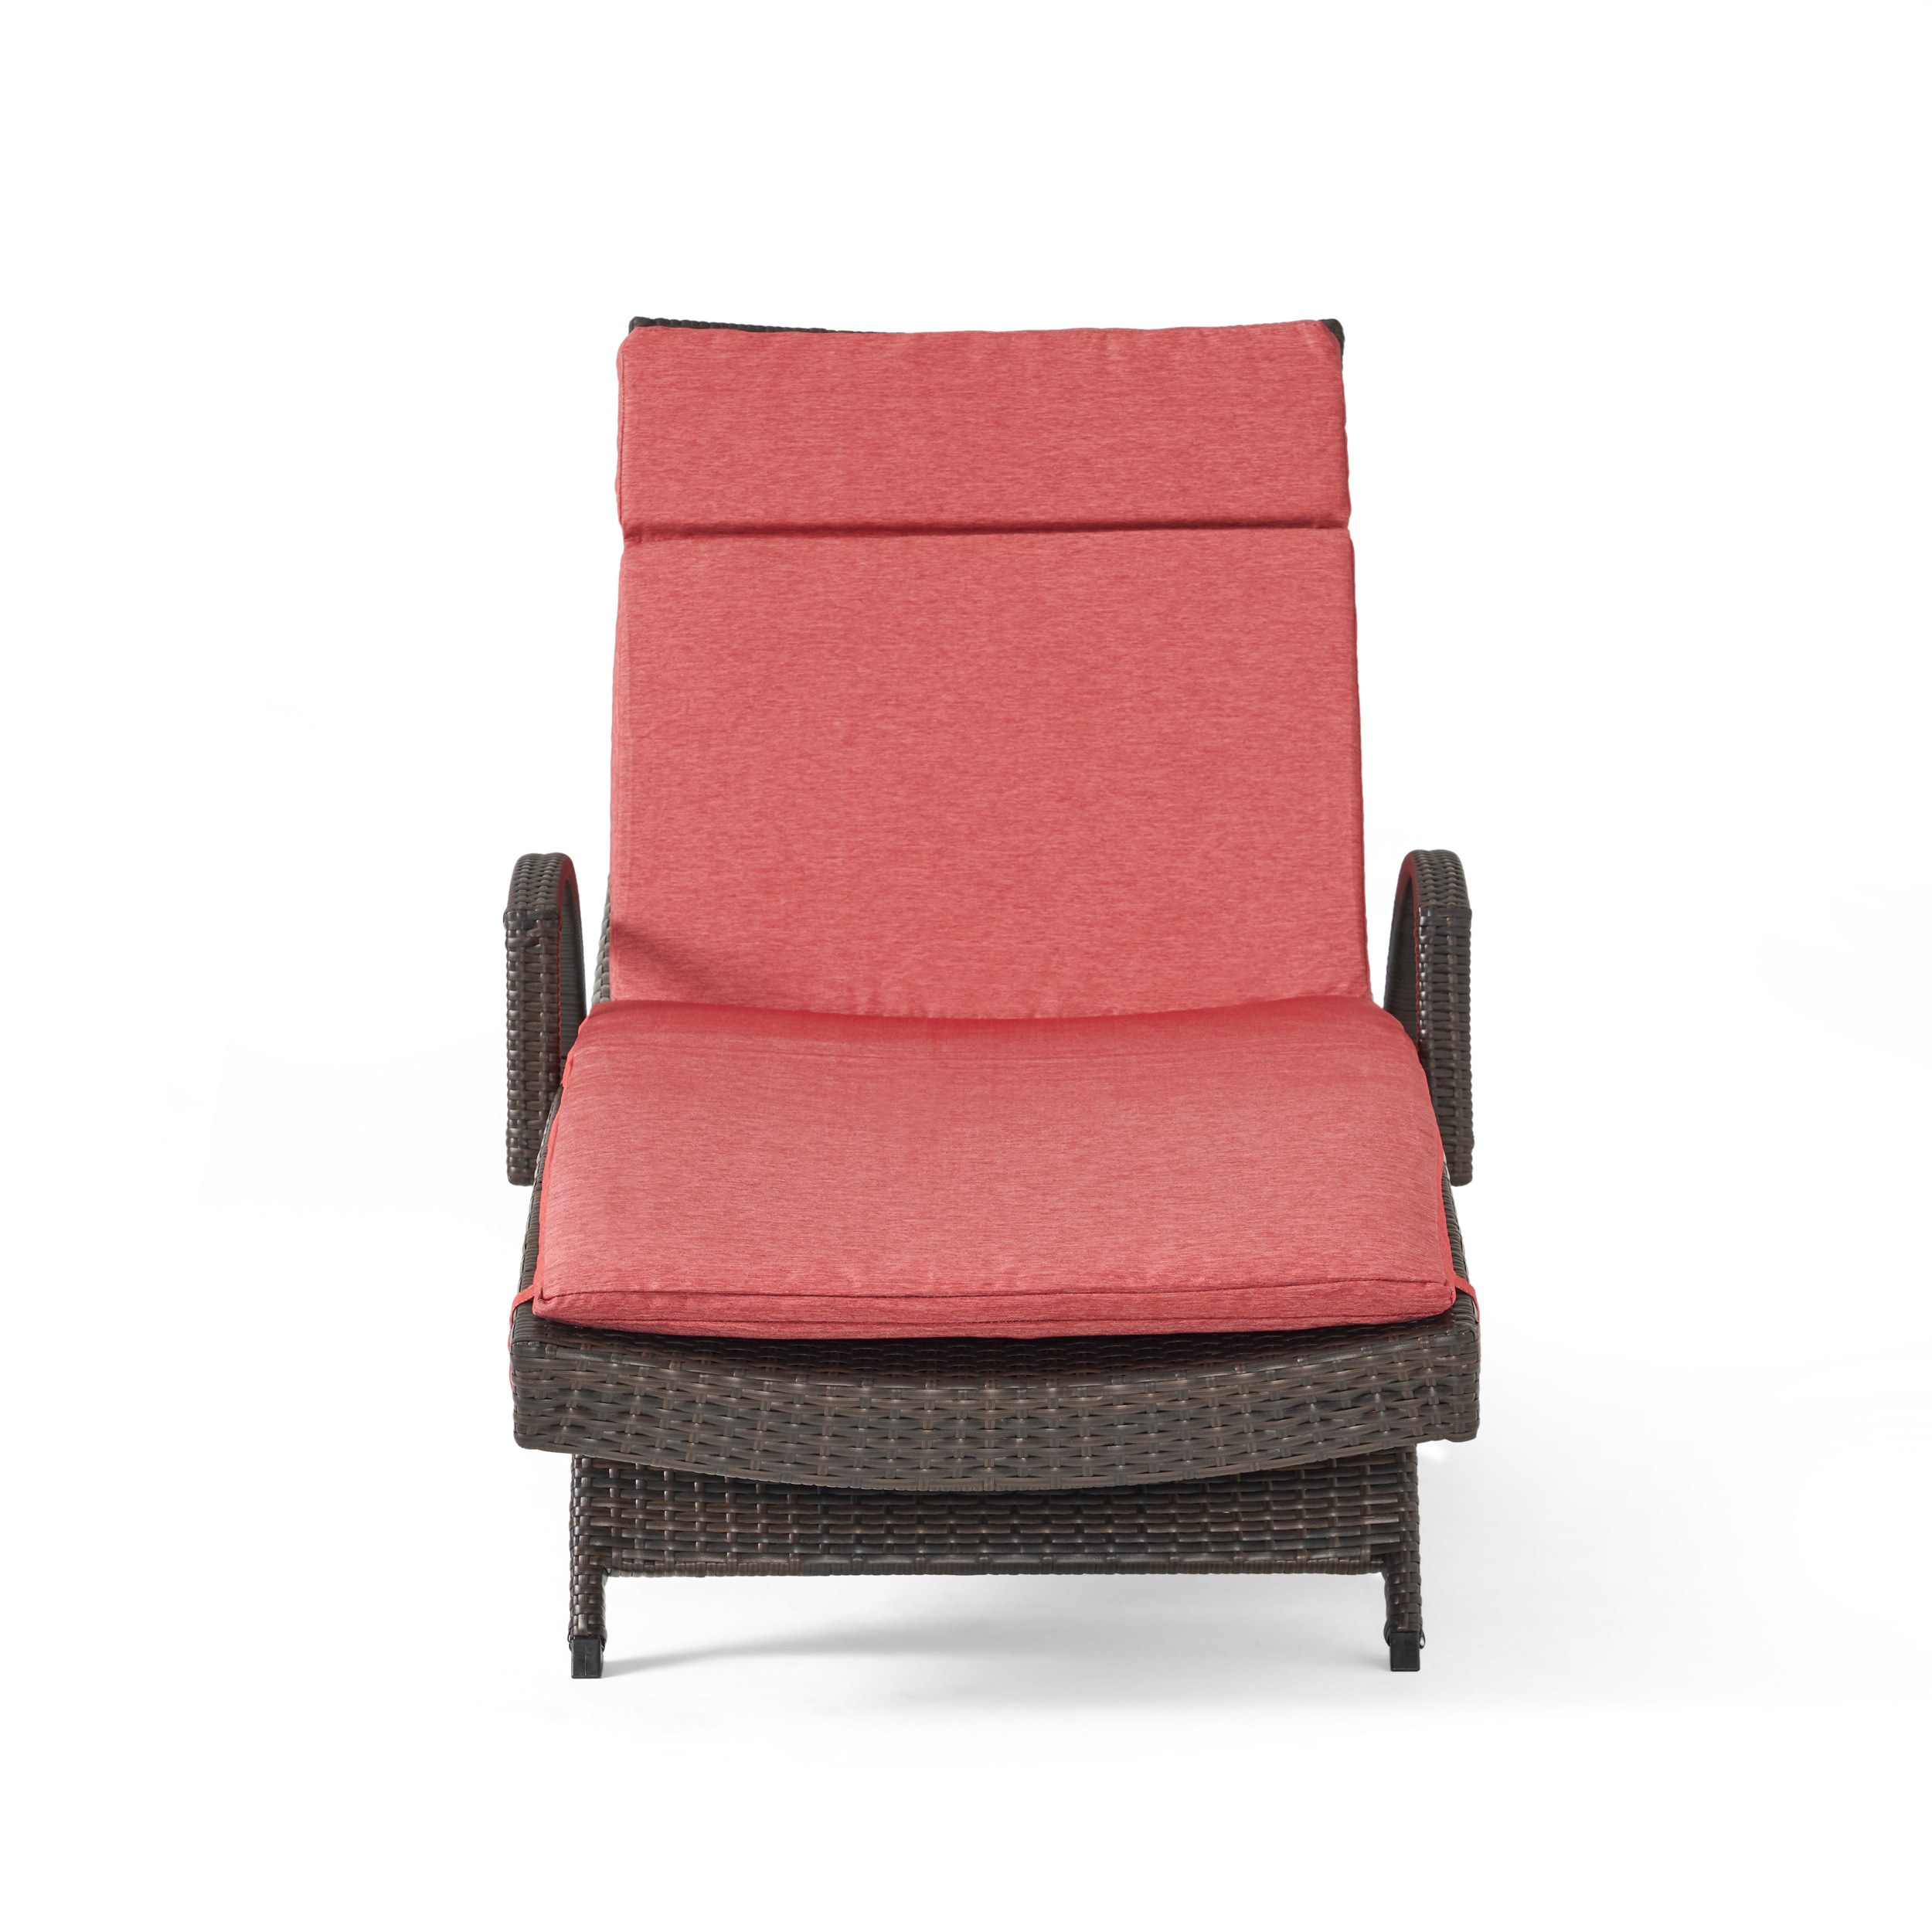 GDF Studio Olivia Outdoor Wicker Adjustable Chaise Lounge with Cushion, Multibrown and Red - image 3 of 8